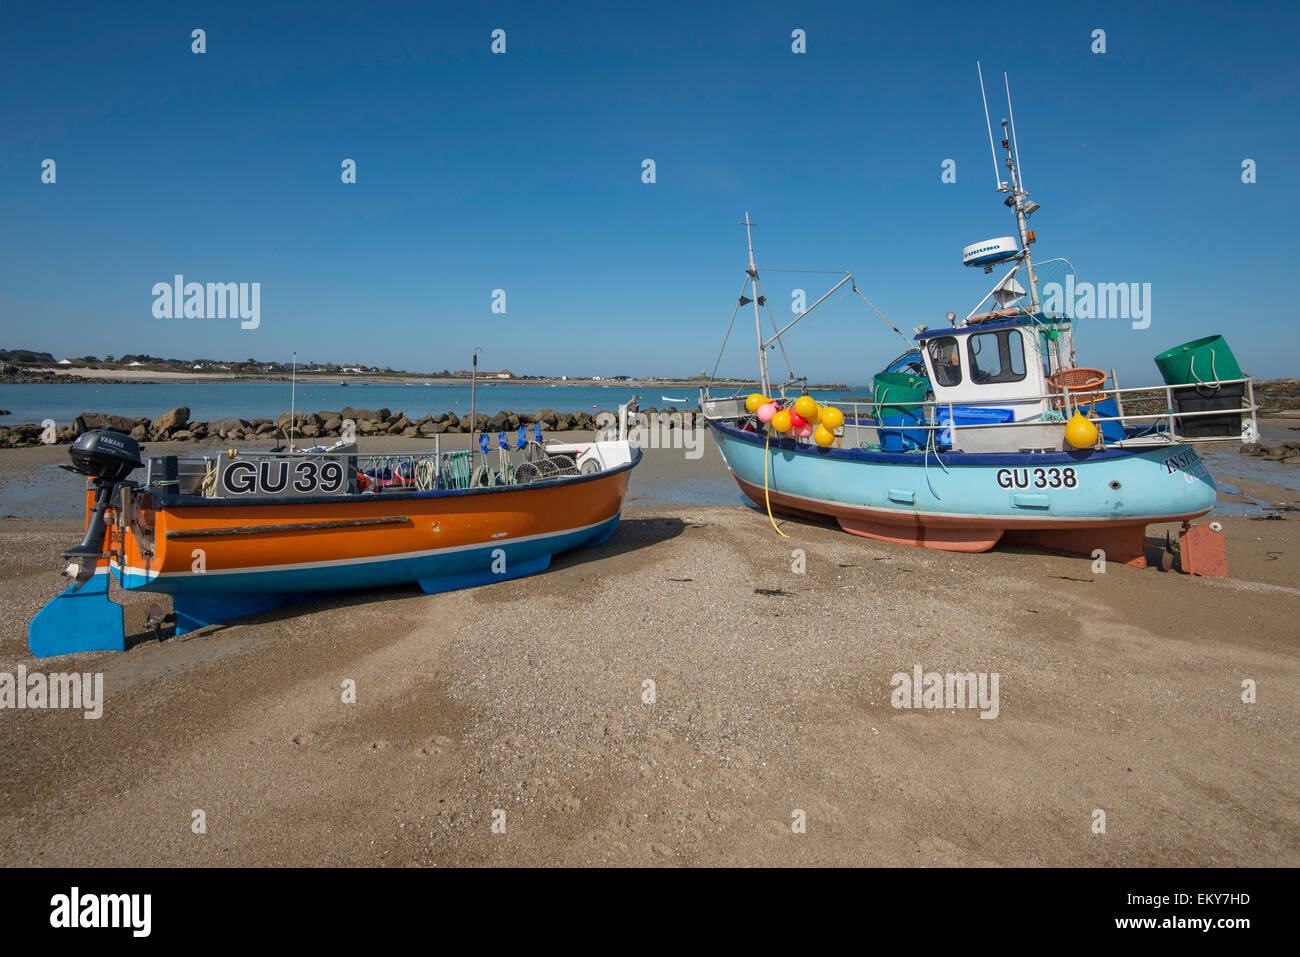 Fishing boats dried out on a sandy beach at low tide. Stock Photo